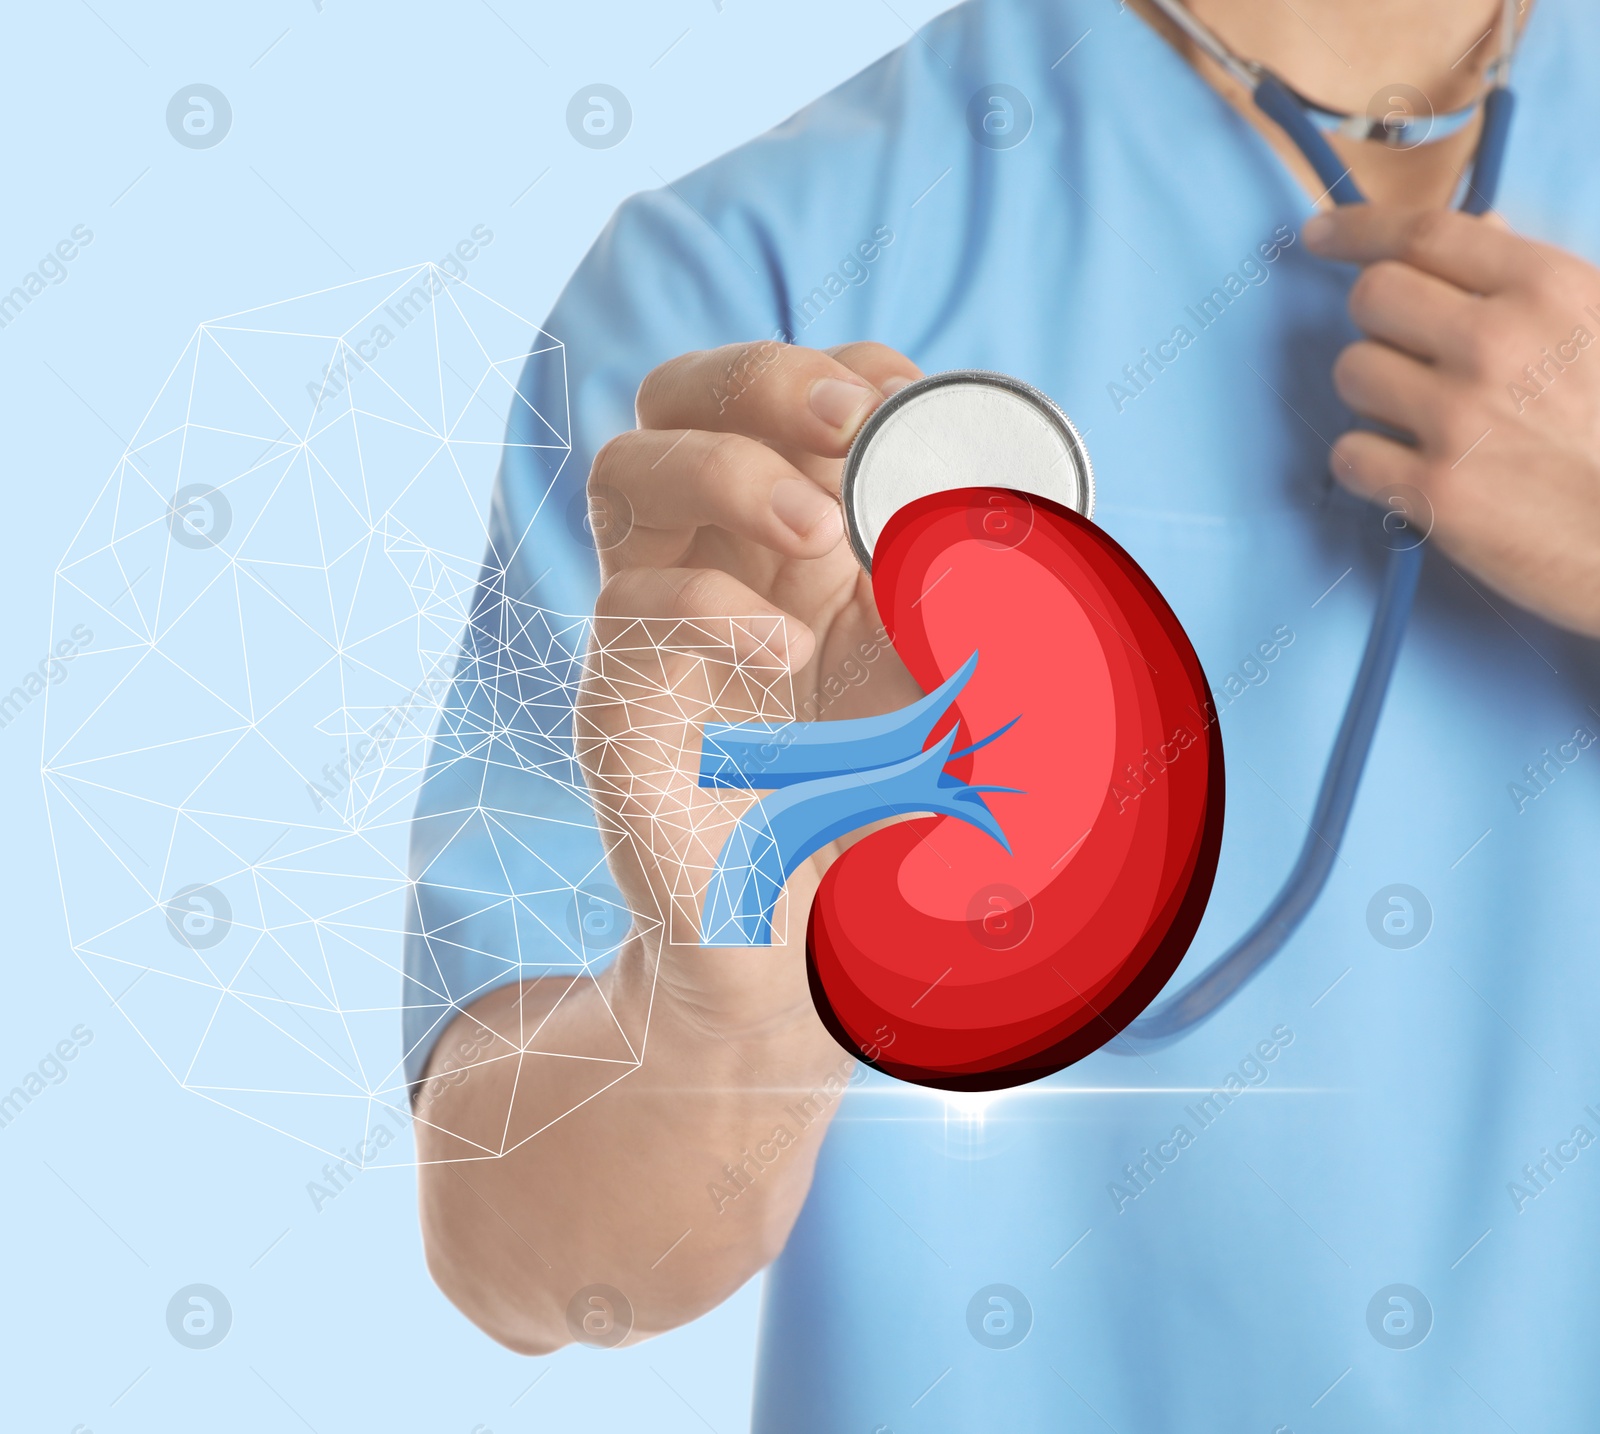 Image of Closeup view of doctor with stethoscope and illustration of kidney on light background